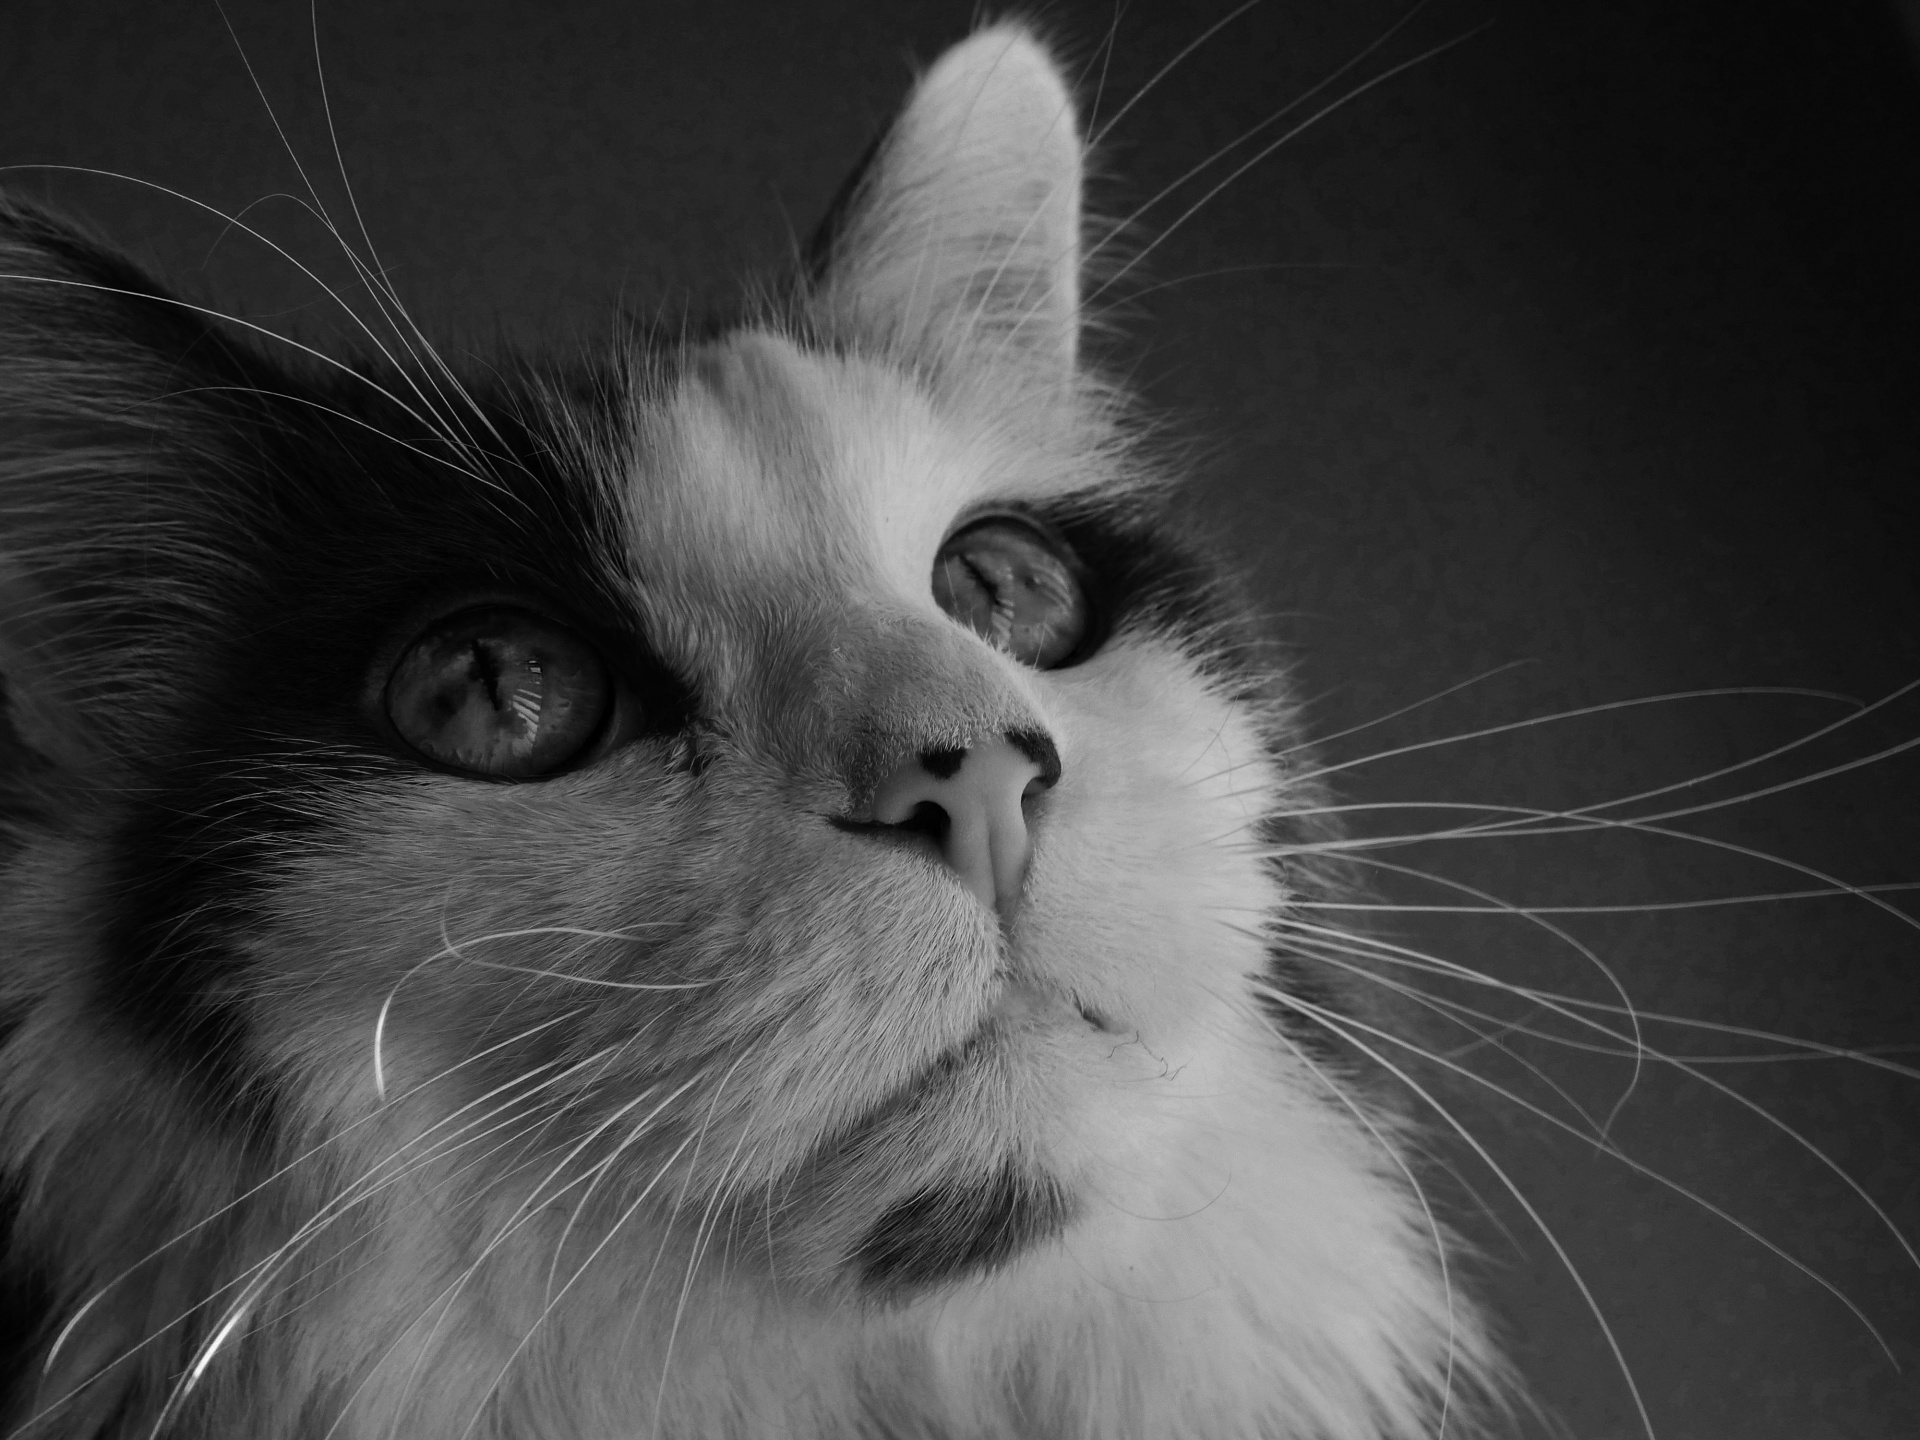 American Longhair cat face portrait in Black and White